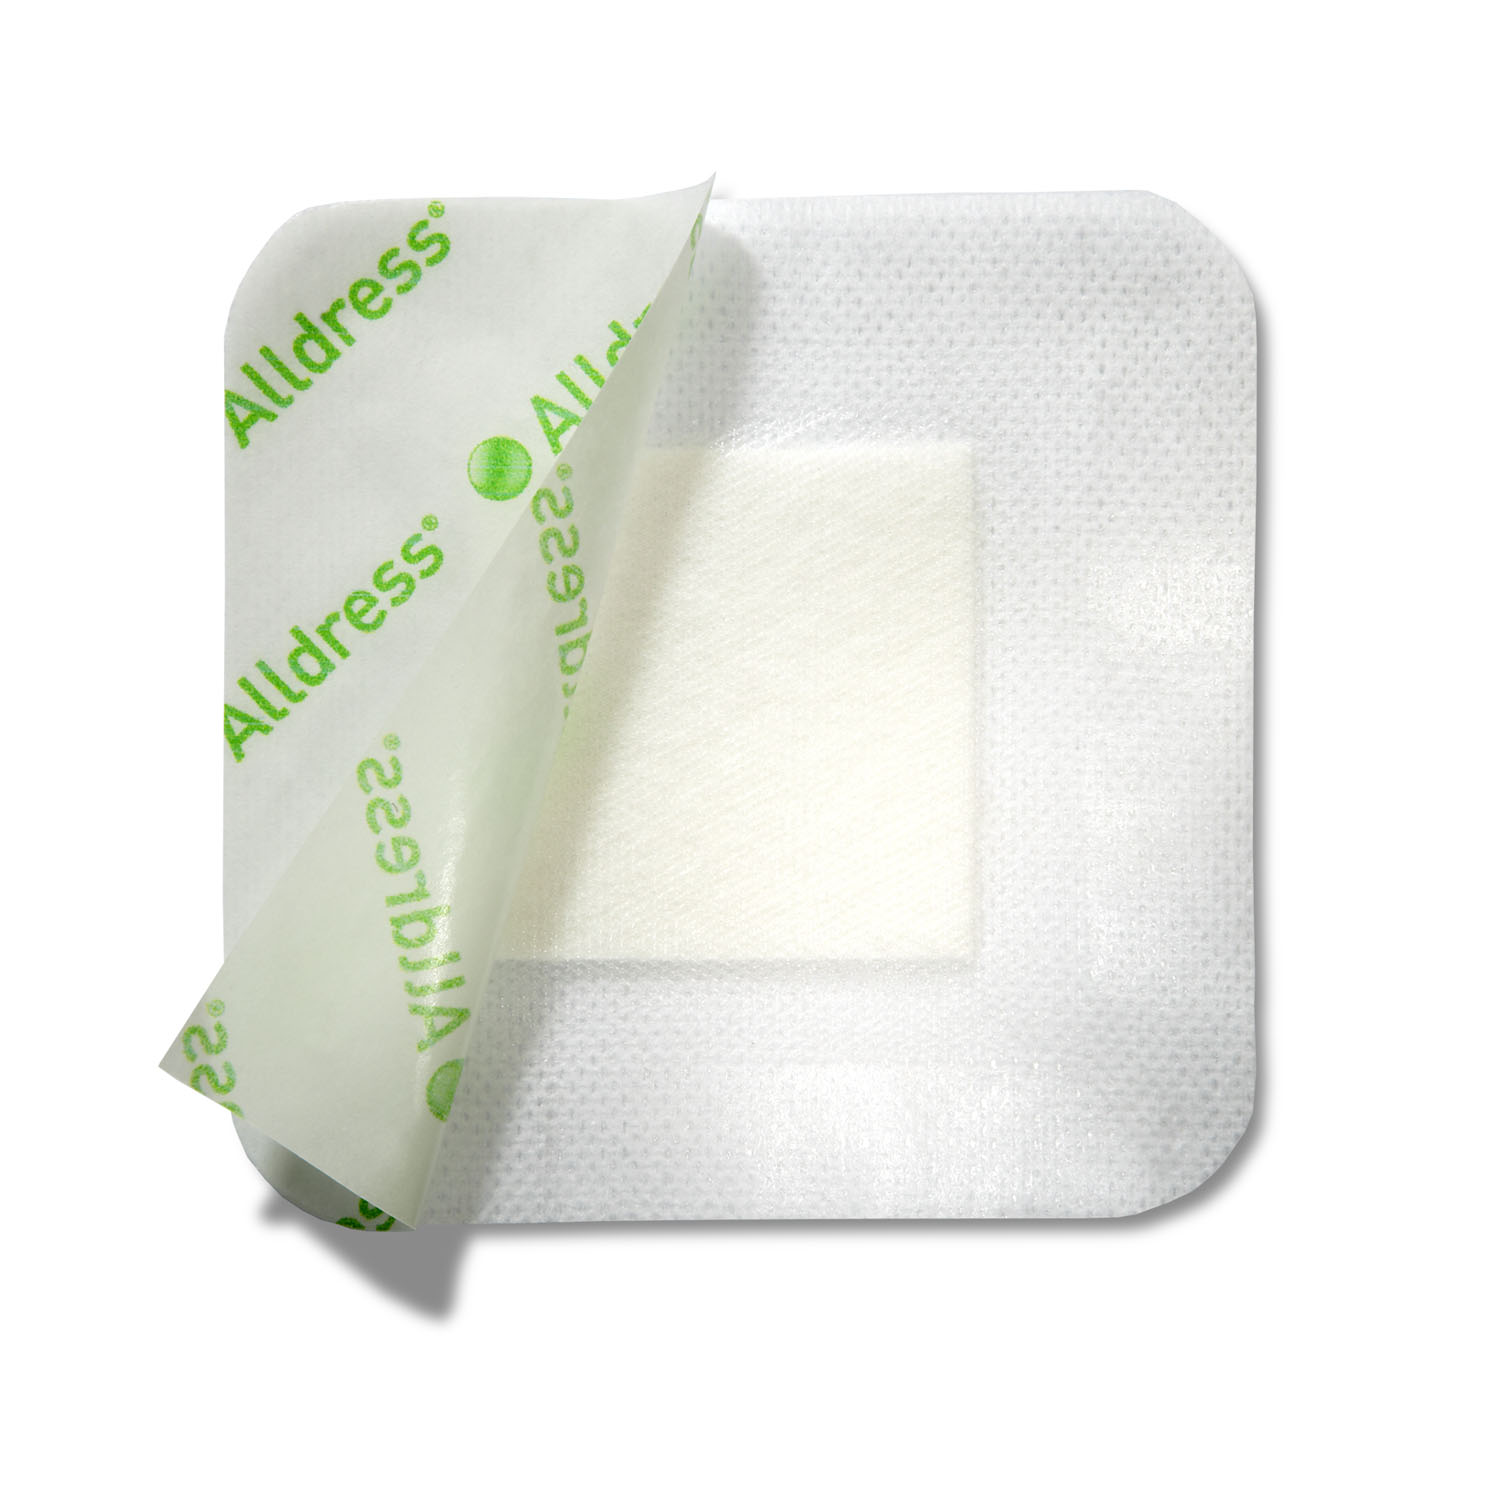 MOLNLYCKE WOUND MANAGEMENT - ALLDRESS : 265329 BX $25.24 Stocked